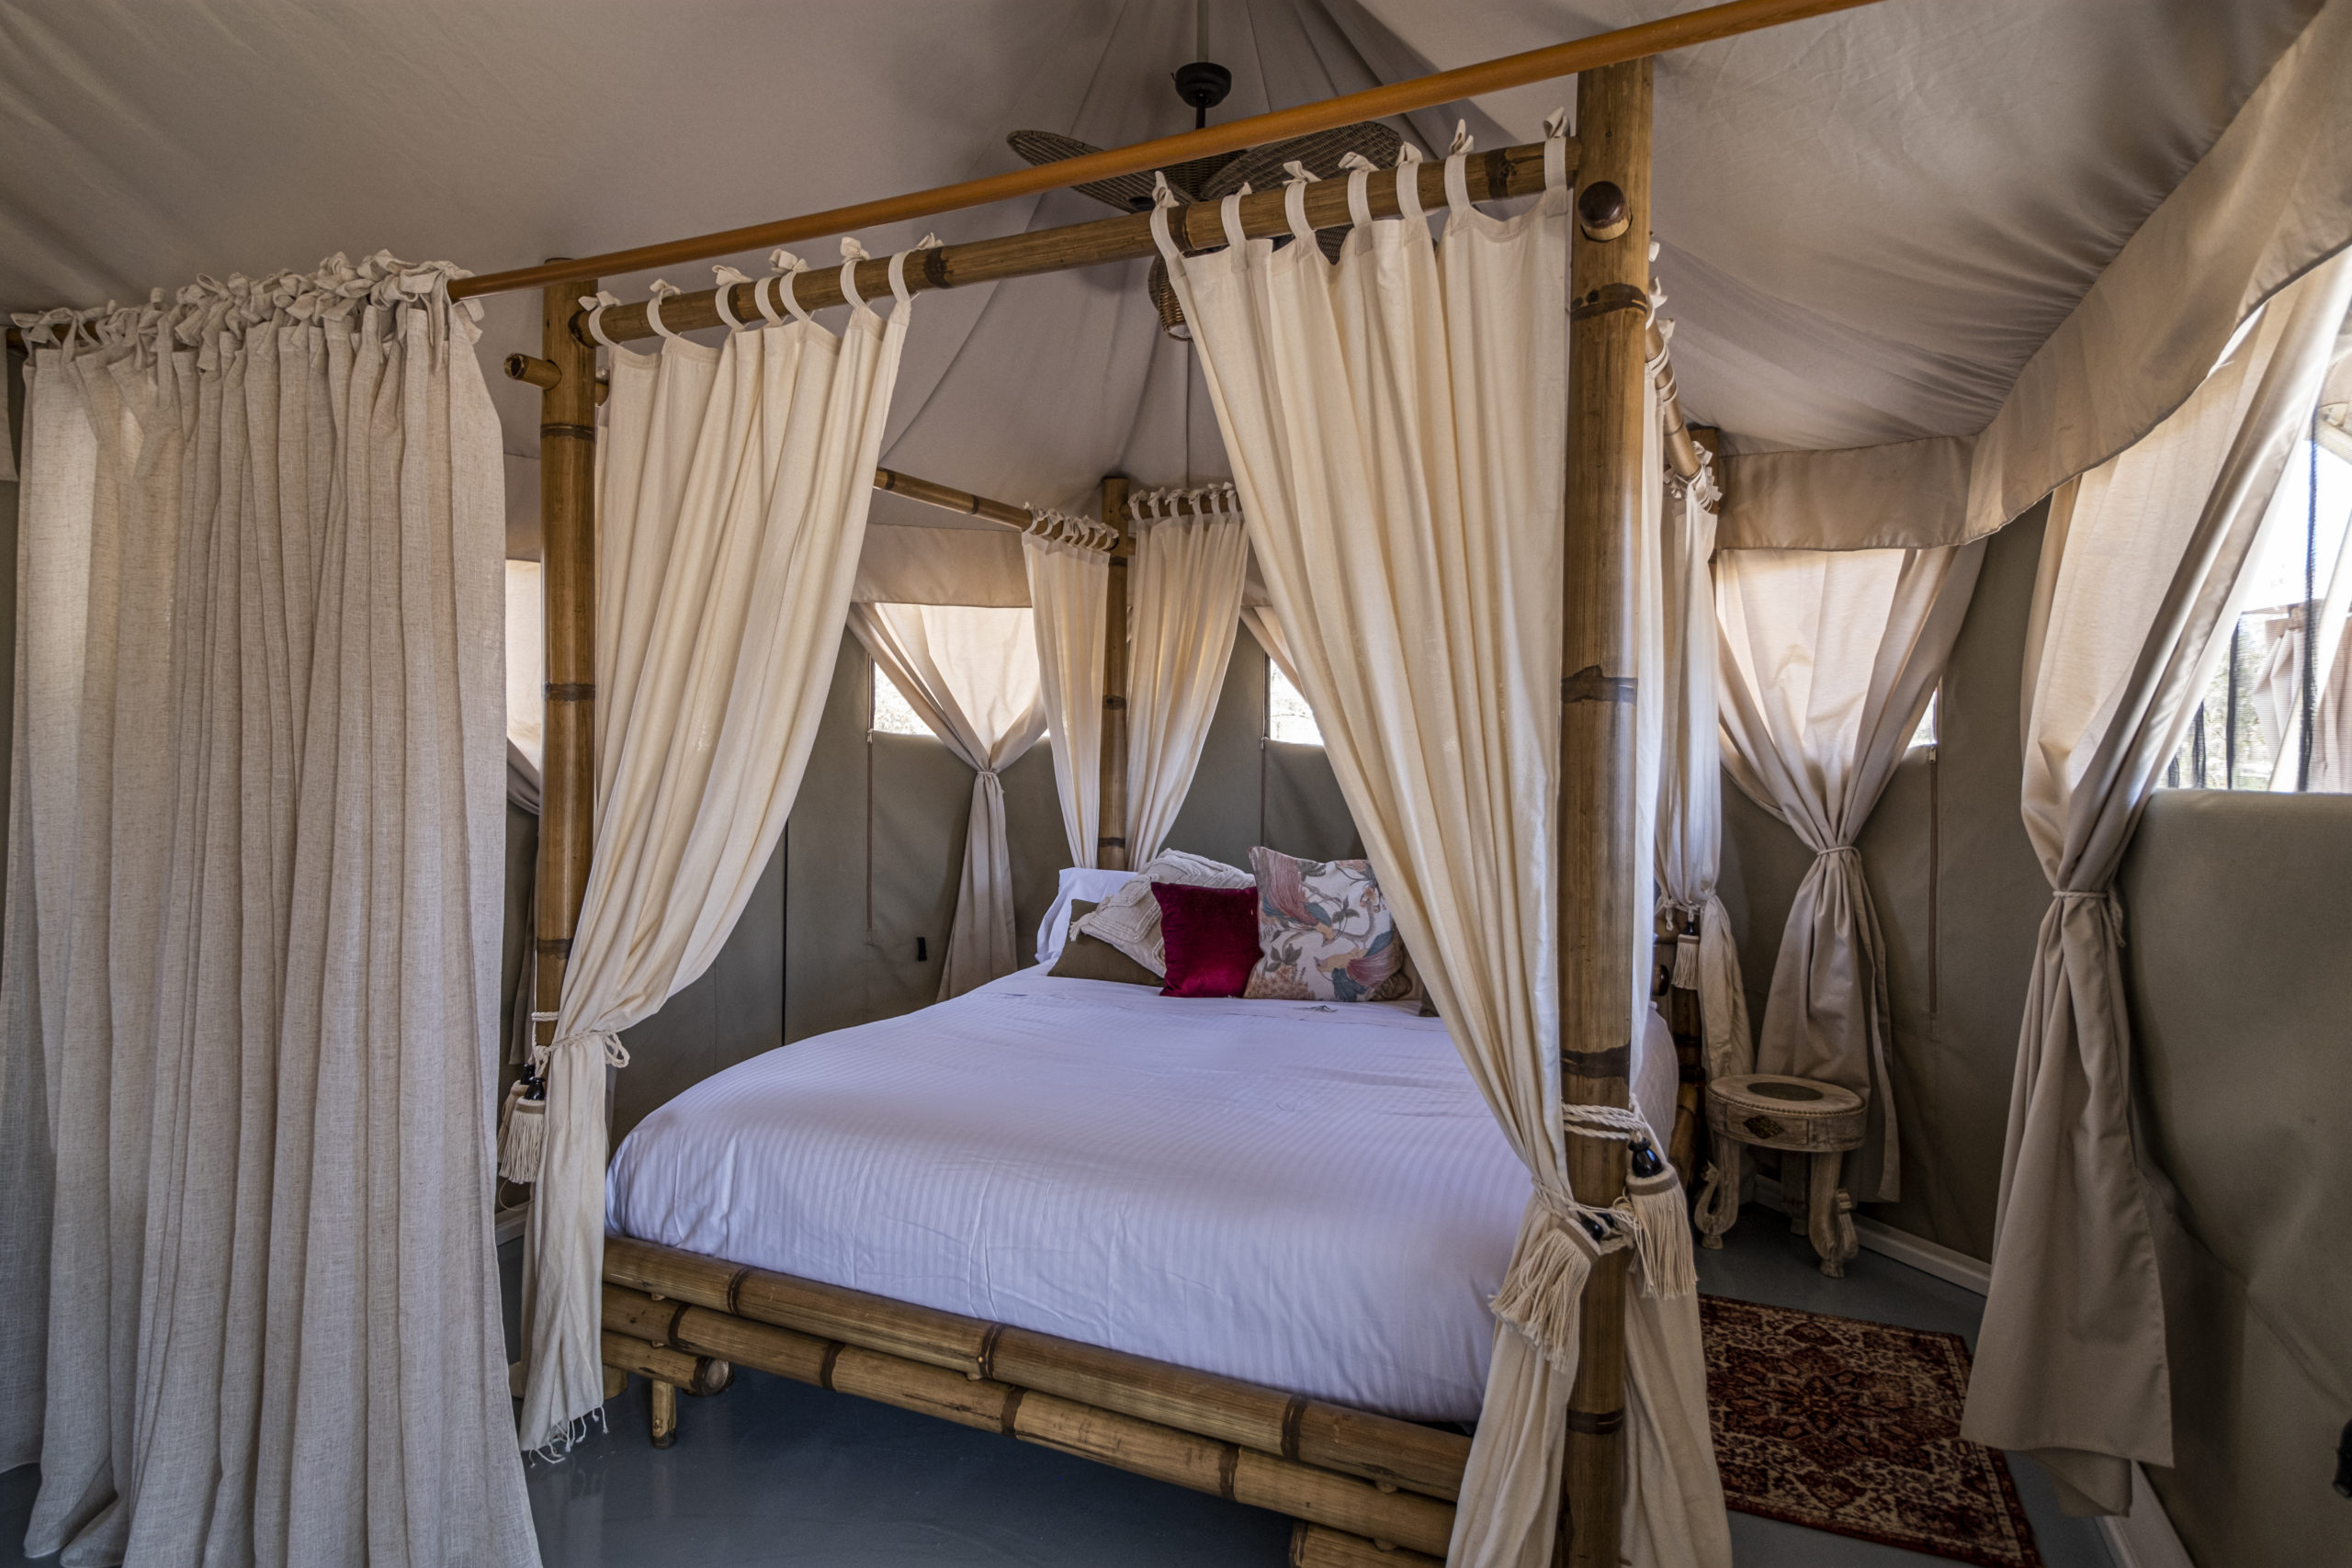 EL TORIL GLAMPING EXPERIENCE